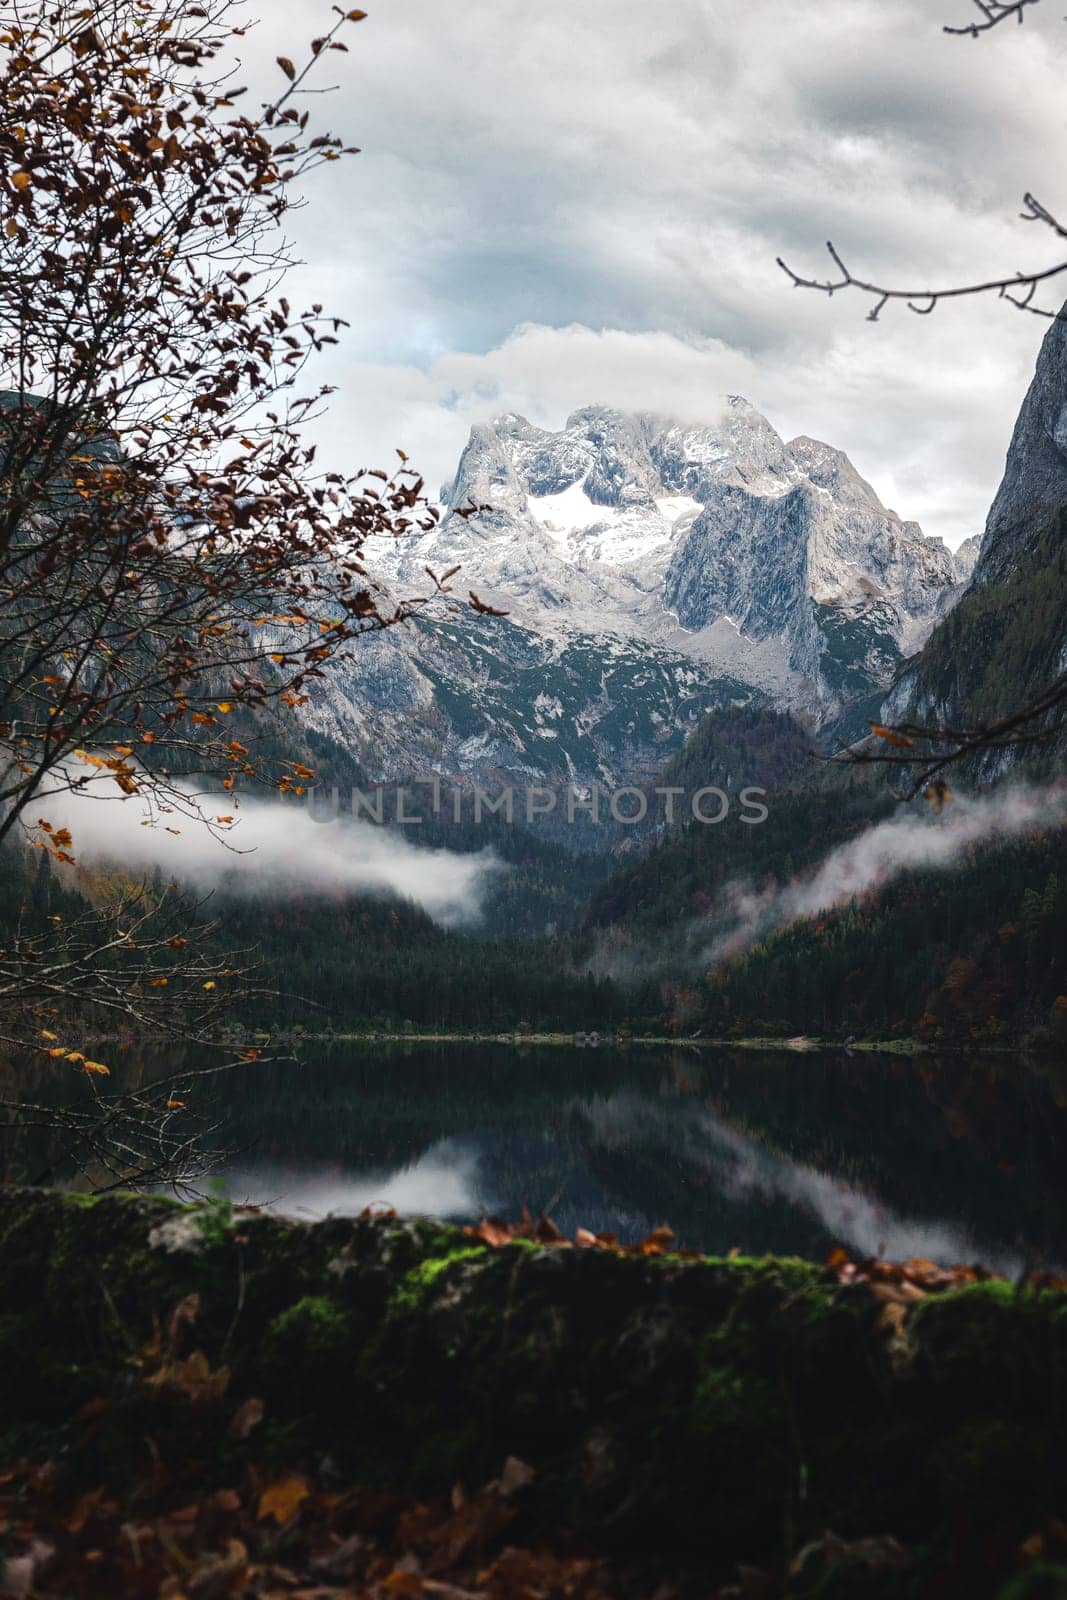 Autumn shot of a sunset at Lake Gosausee framed by orange and yellow trees against the backdrop of the Austrian Alps. The clouds lie low on the trees. There are yellowed leaves on the ground, the mountain and the sky are reflected in the lake.